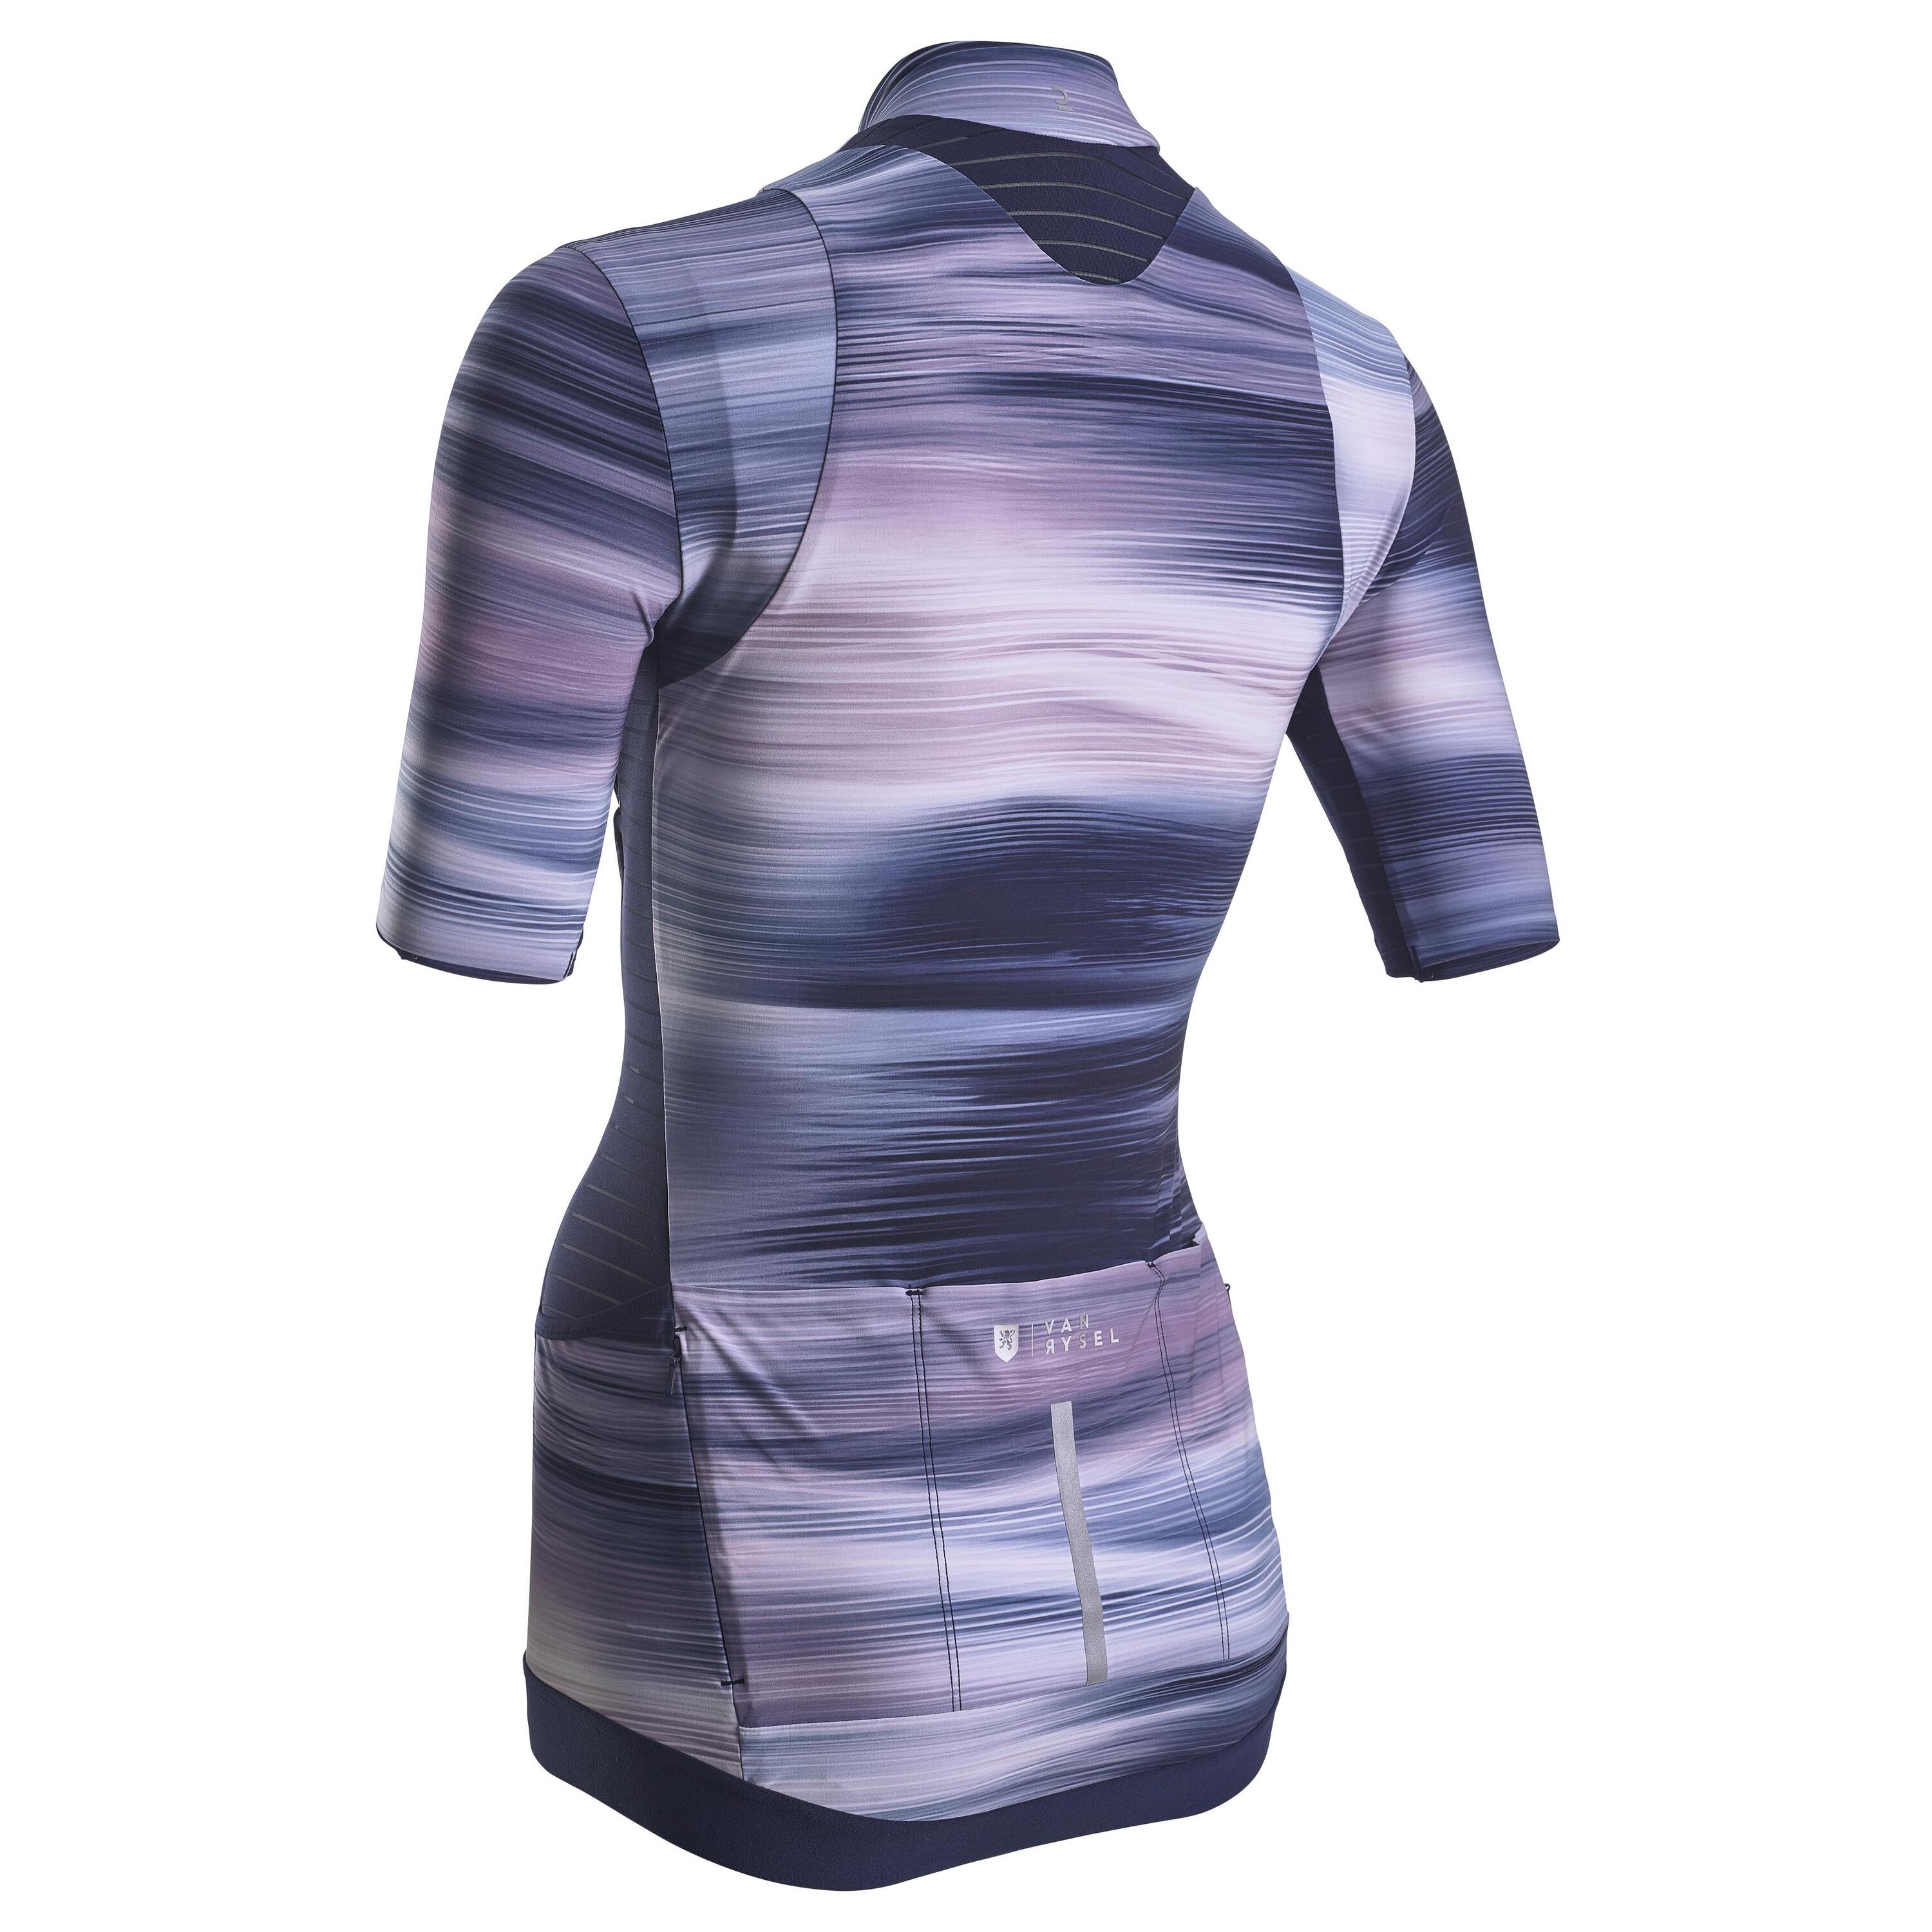 Women's Short-Sleeved Road Cycling Jersey Racer - Antelope Lilac 2/6